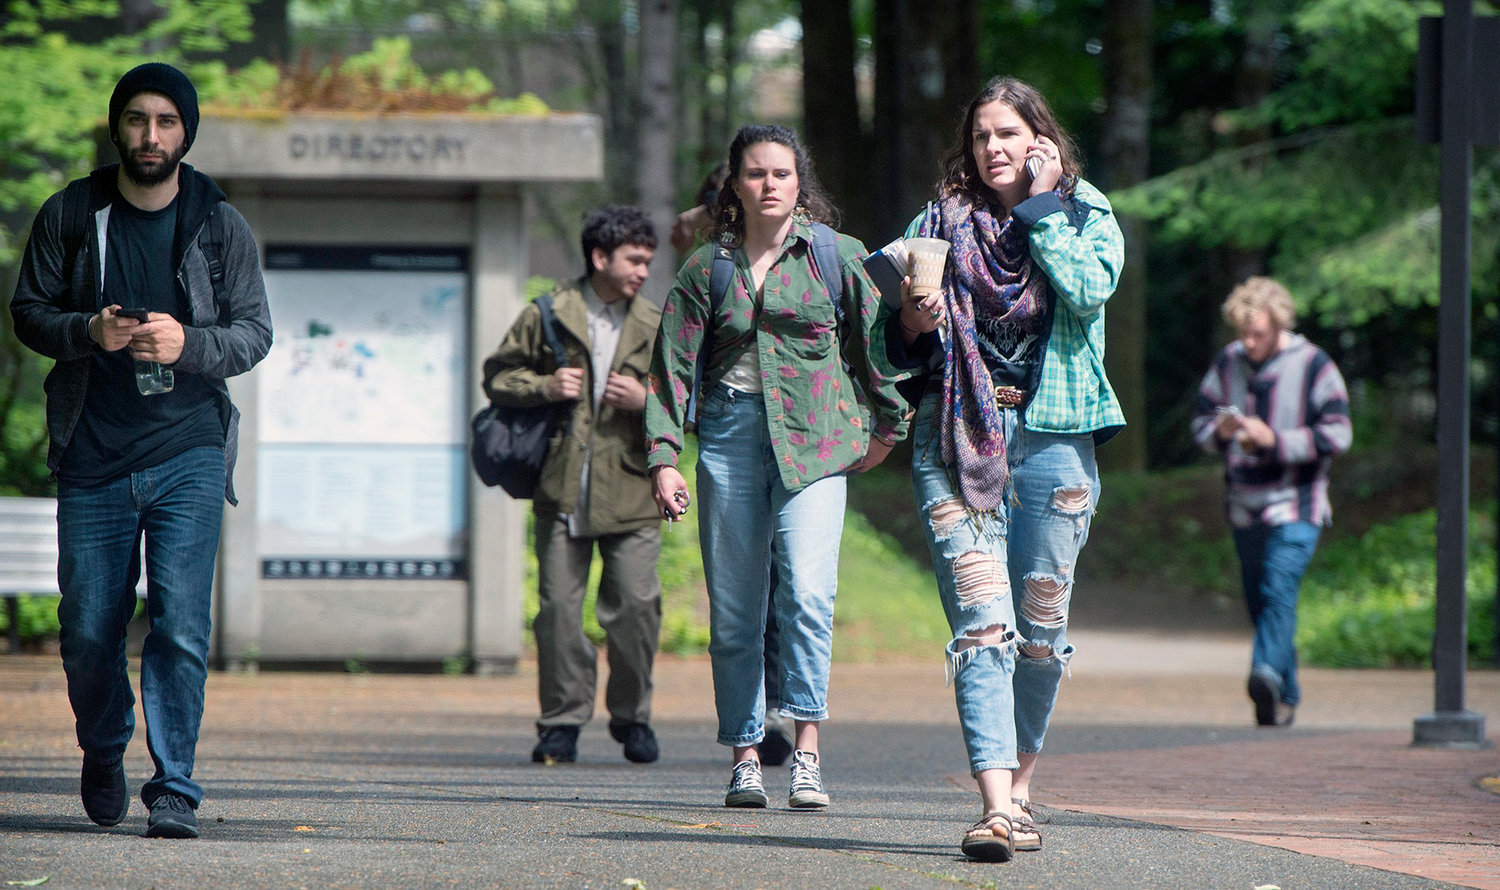 Students leave The Evergreen State College campus in Olympia after a threat prompted a student alert and evacuation on Thursday, June 1, 2017. The announcement posted on the school's website Thursday asked everyone to leave the Olympia campus or return to residence halls for further instructions. (Tony Overman /The Olympian via AP)